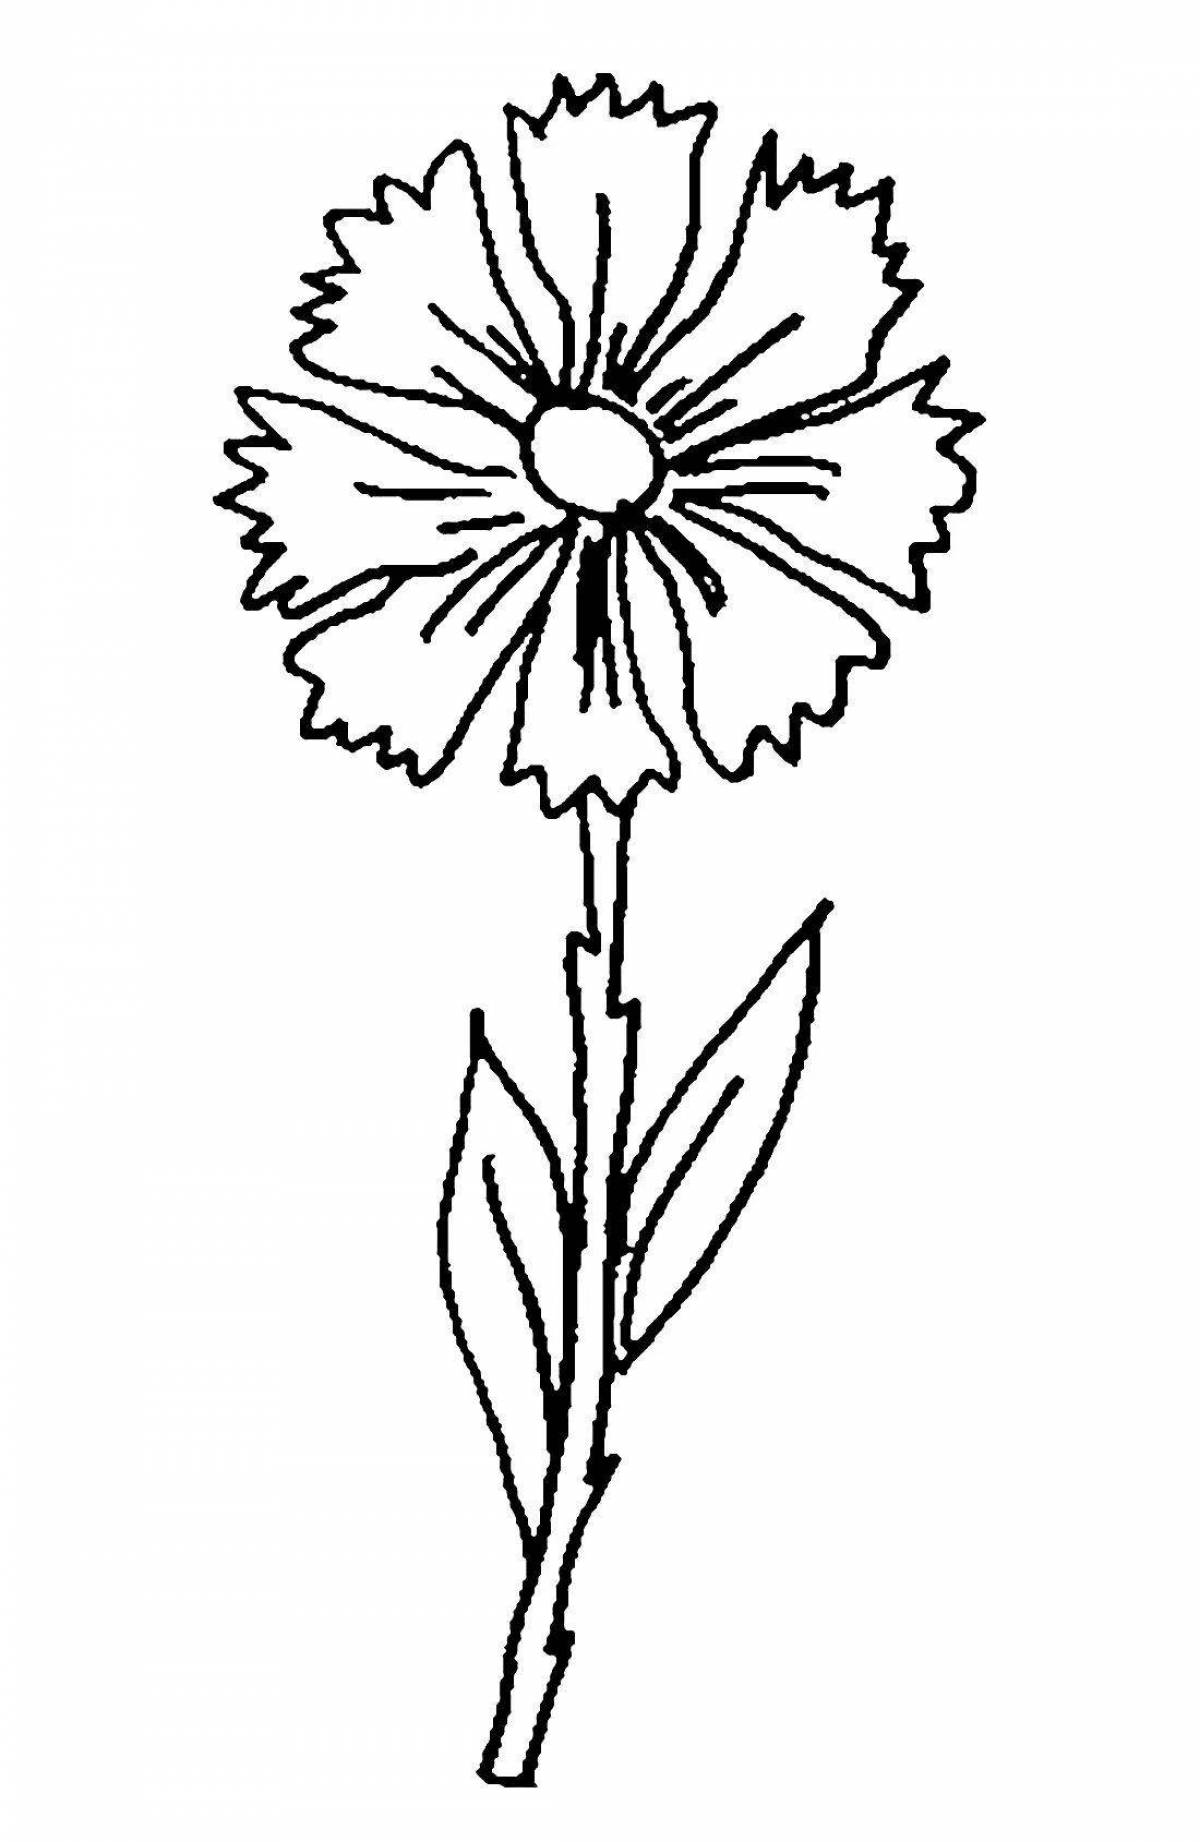 Exciting cornflower coloring book for kids